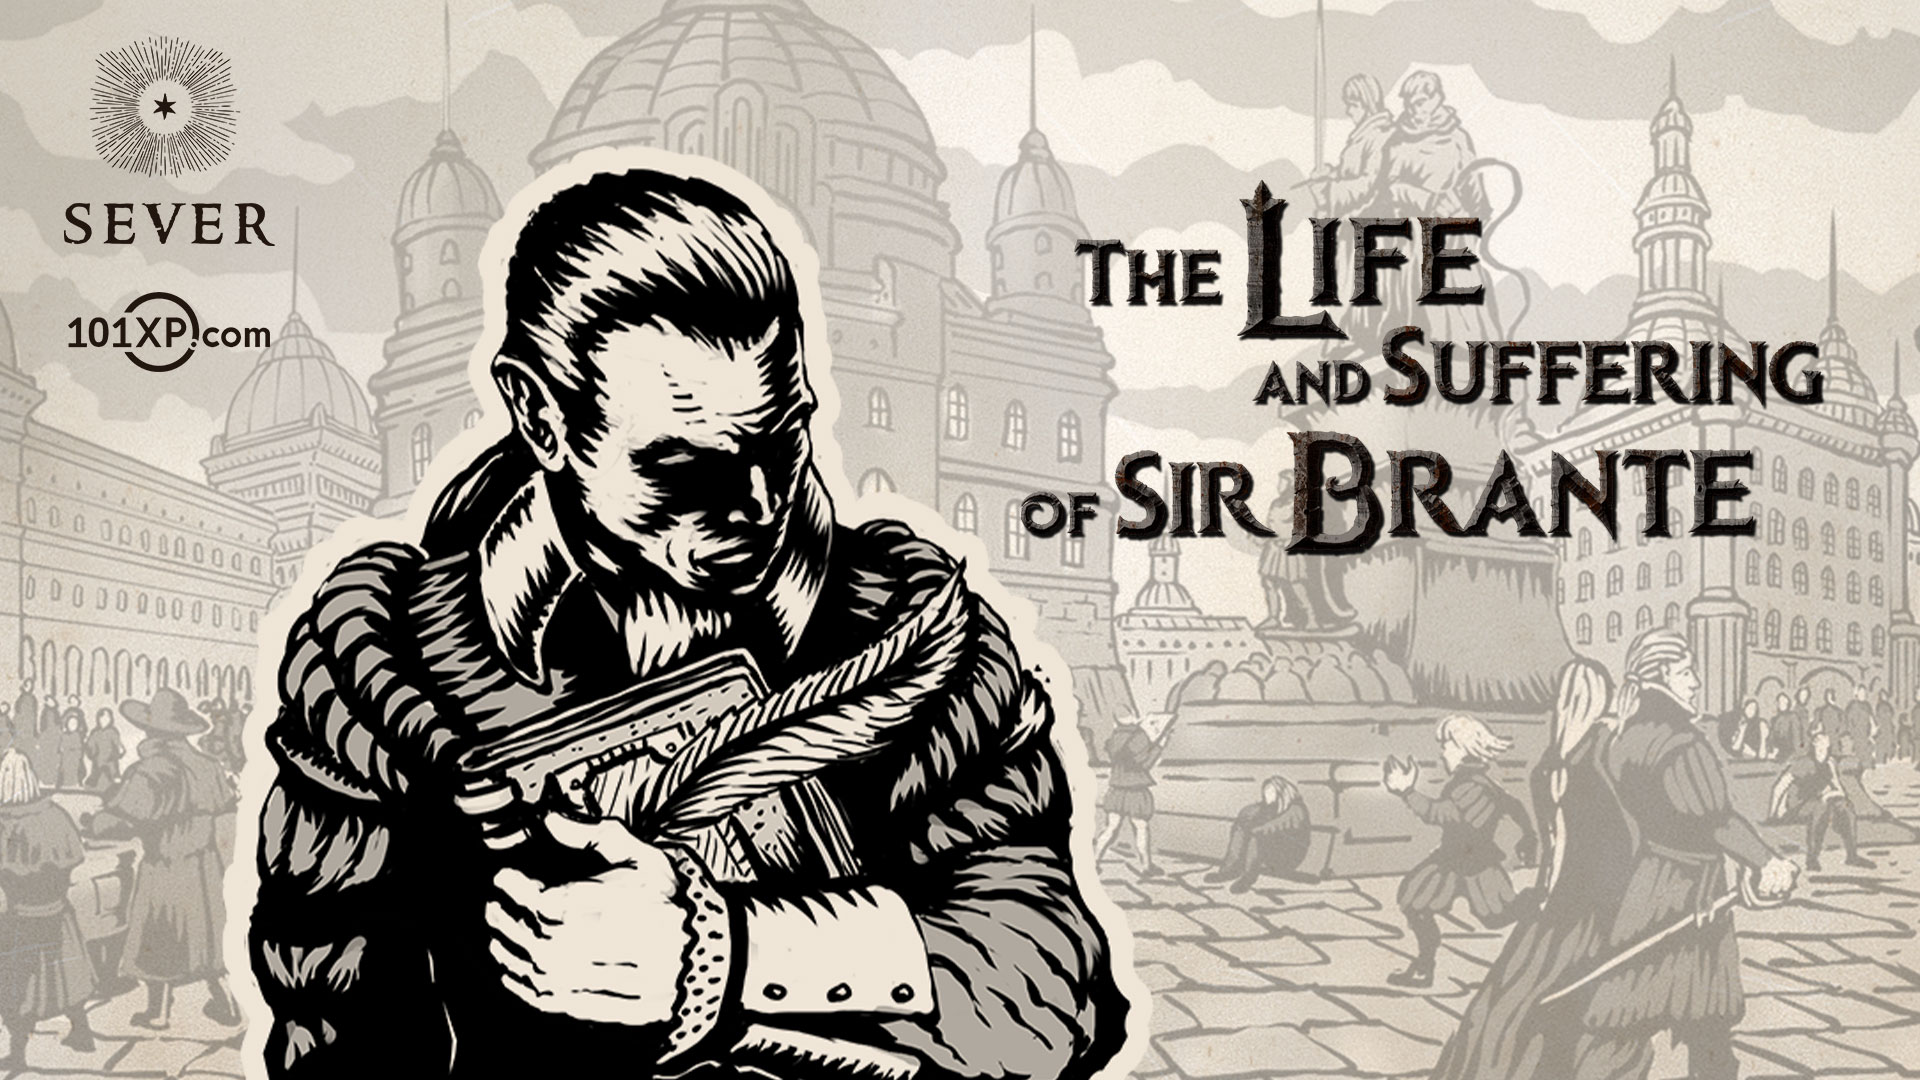 The Life and Suffering of Sir Brante Artwork 002